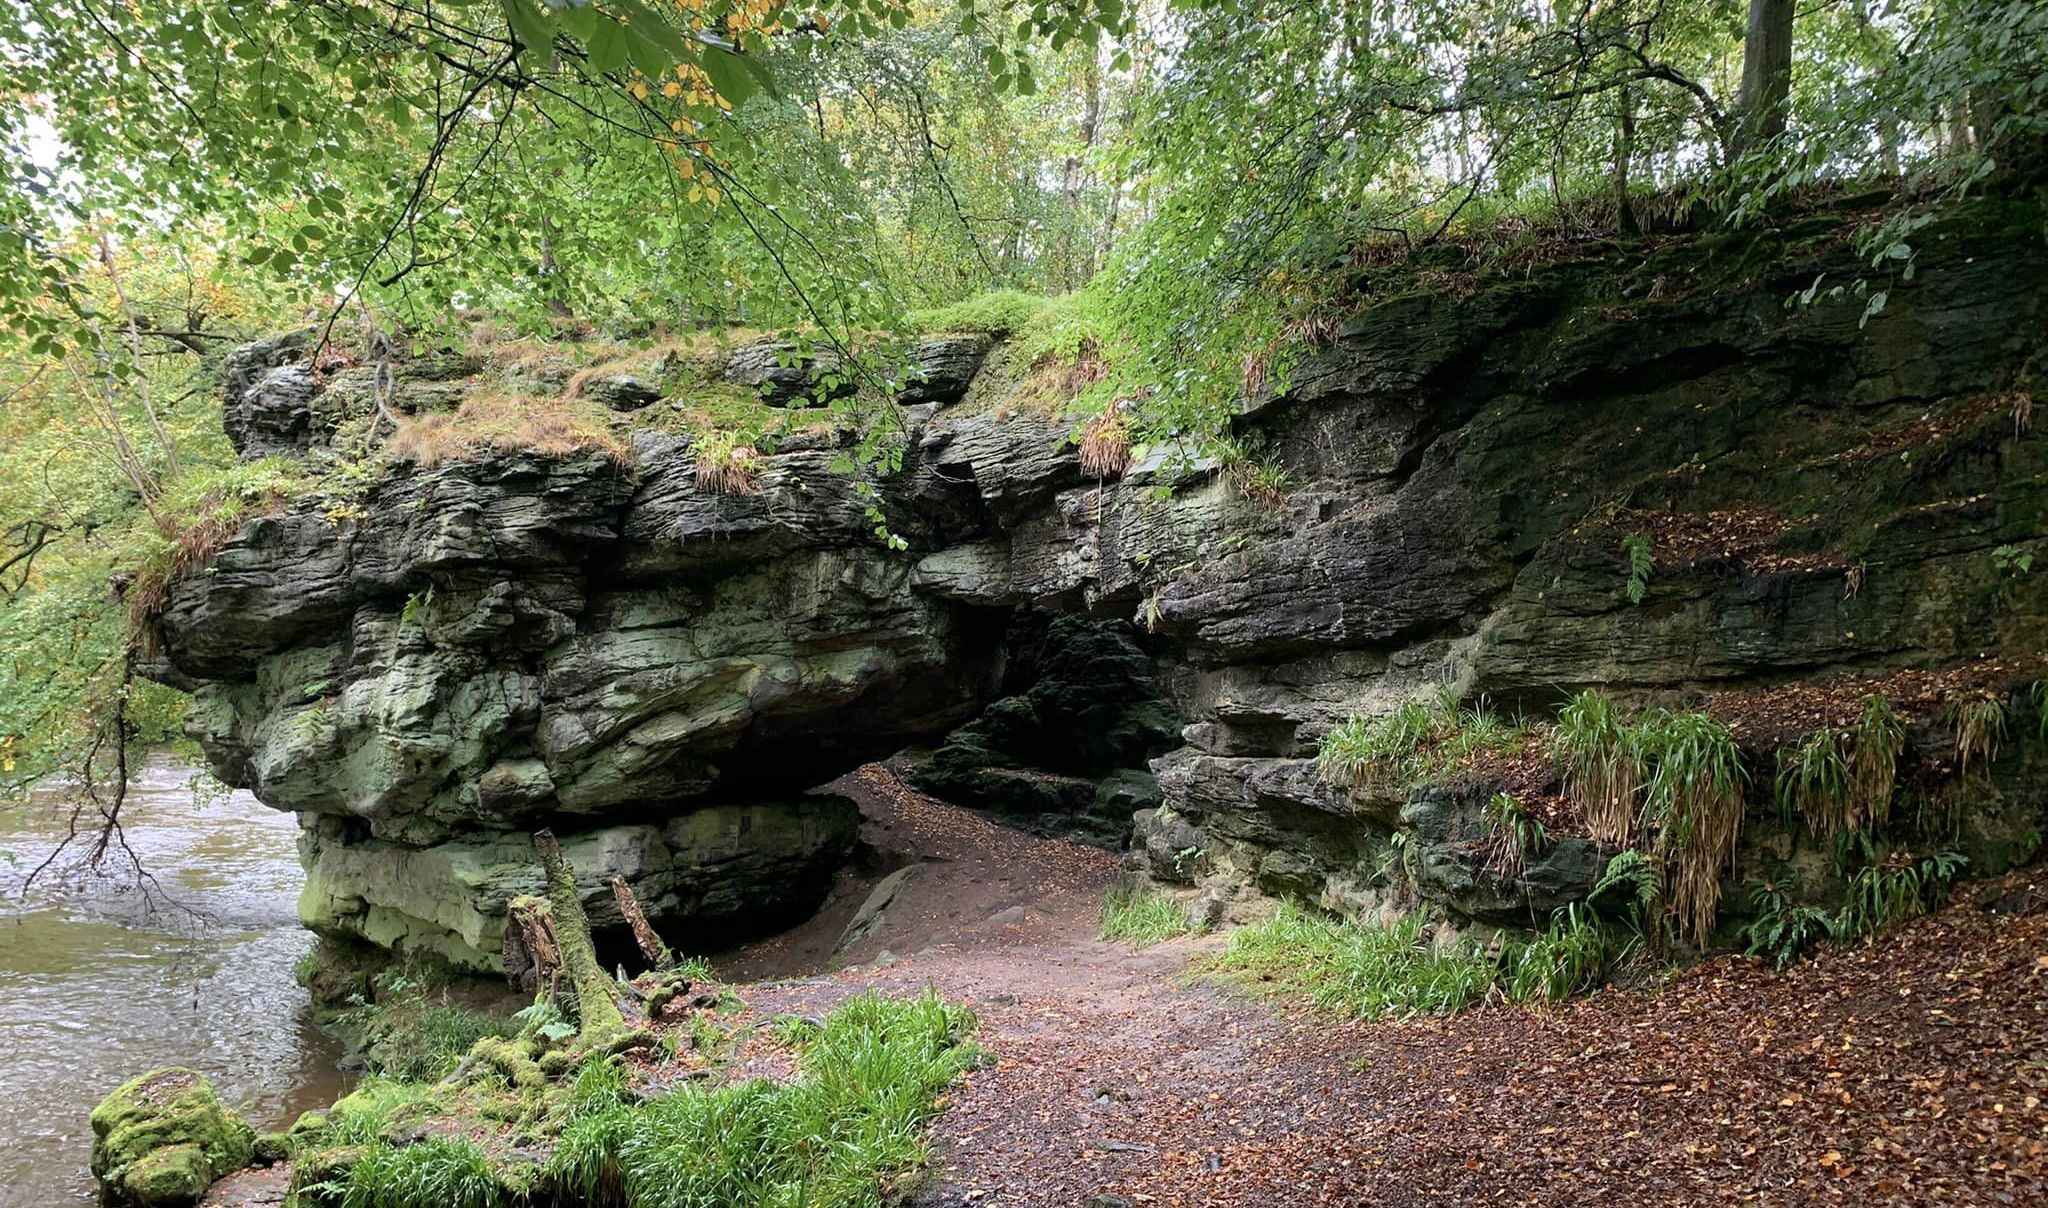 Wallace's Cave